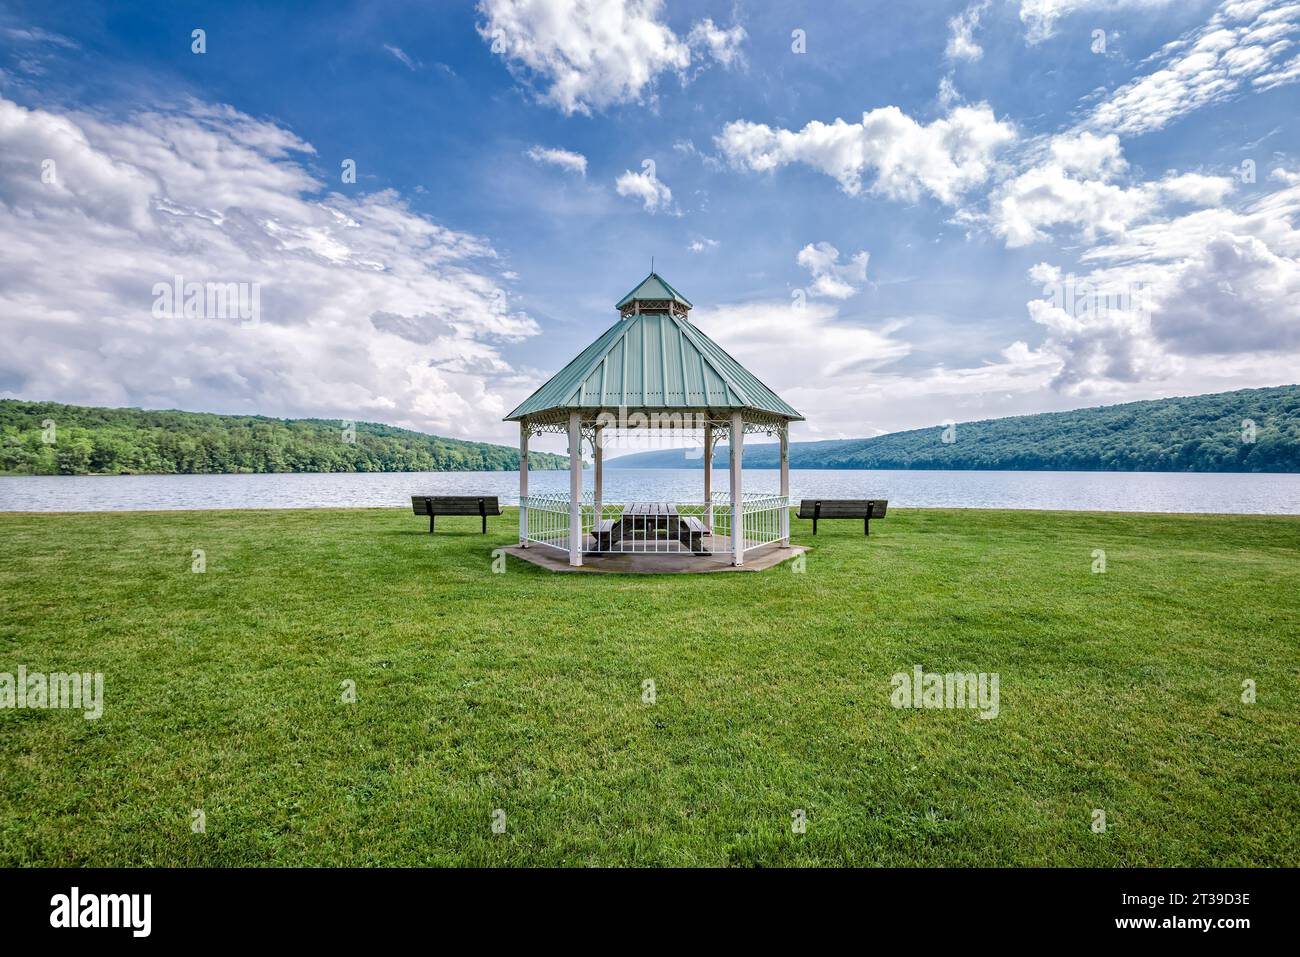 Picturesque view of drinking water lake with green grass lawn relaxing benches and lonely roof supported on pillars under cloudy blue sky in daylight Stock Photo